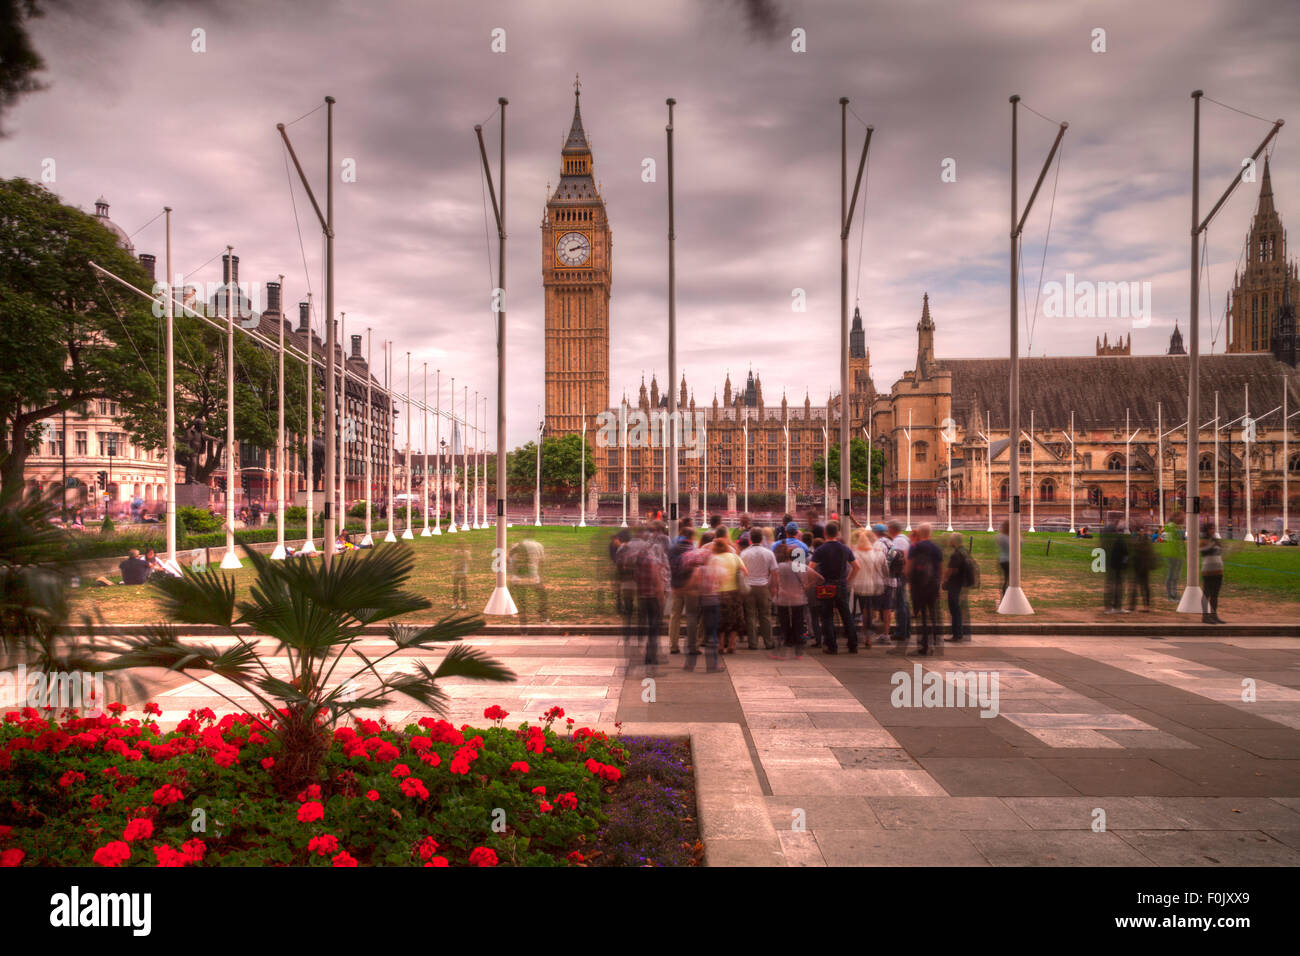 Parliament Square and The Houses Of Parliament, London, England Stock Photo